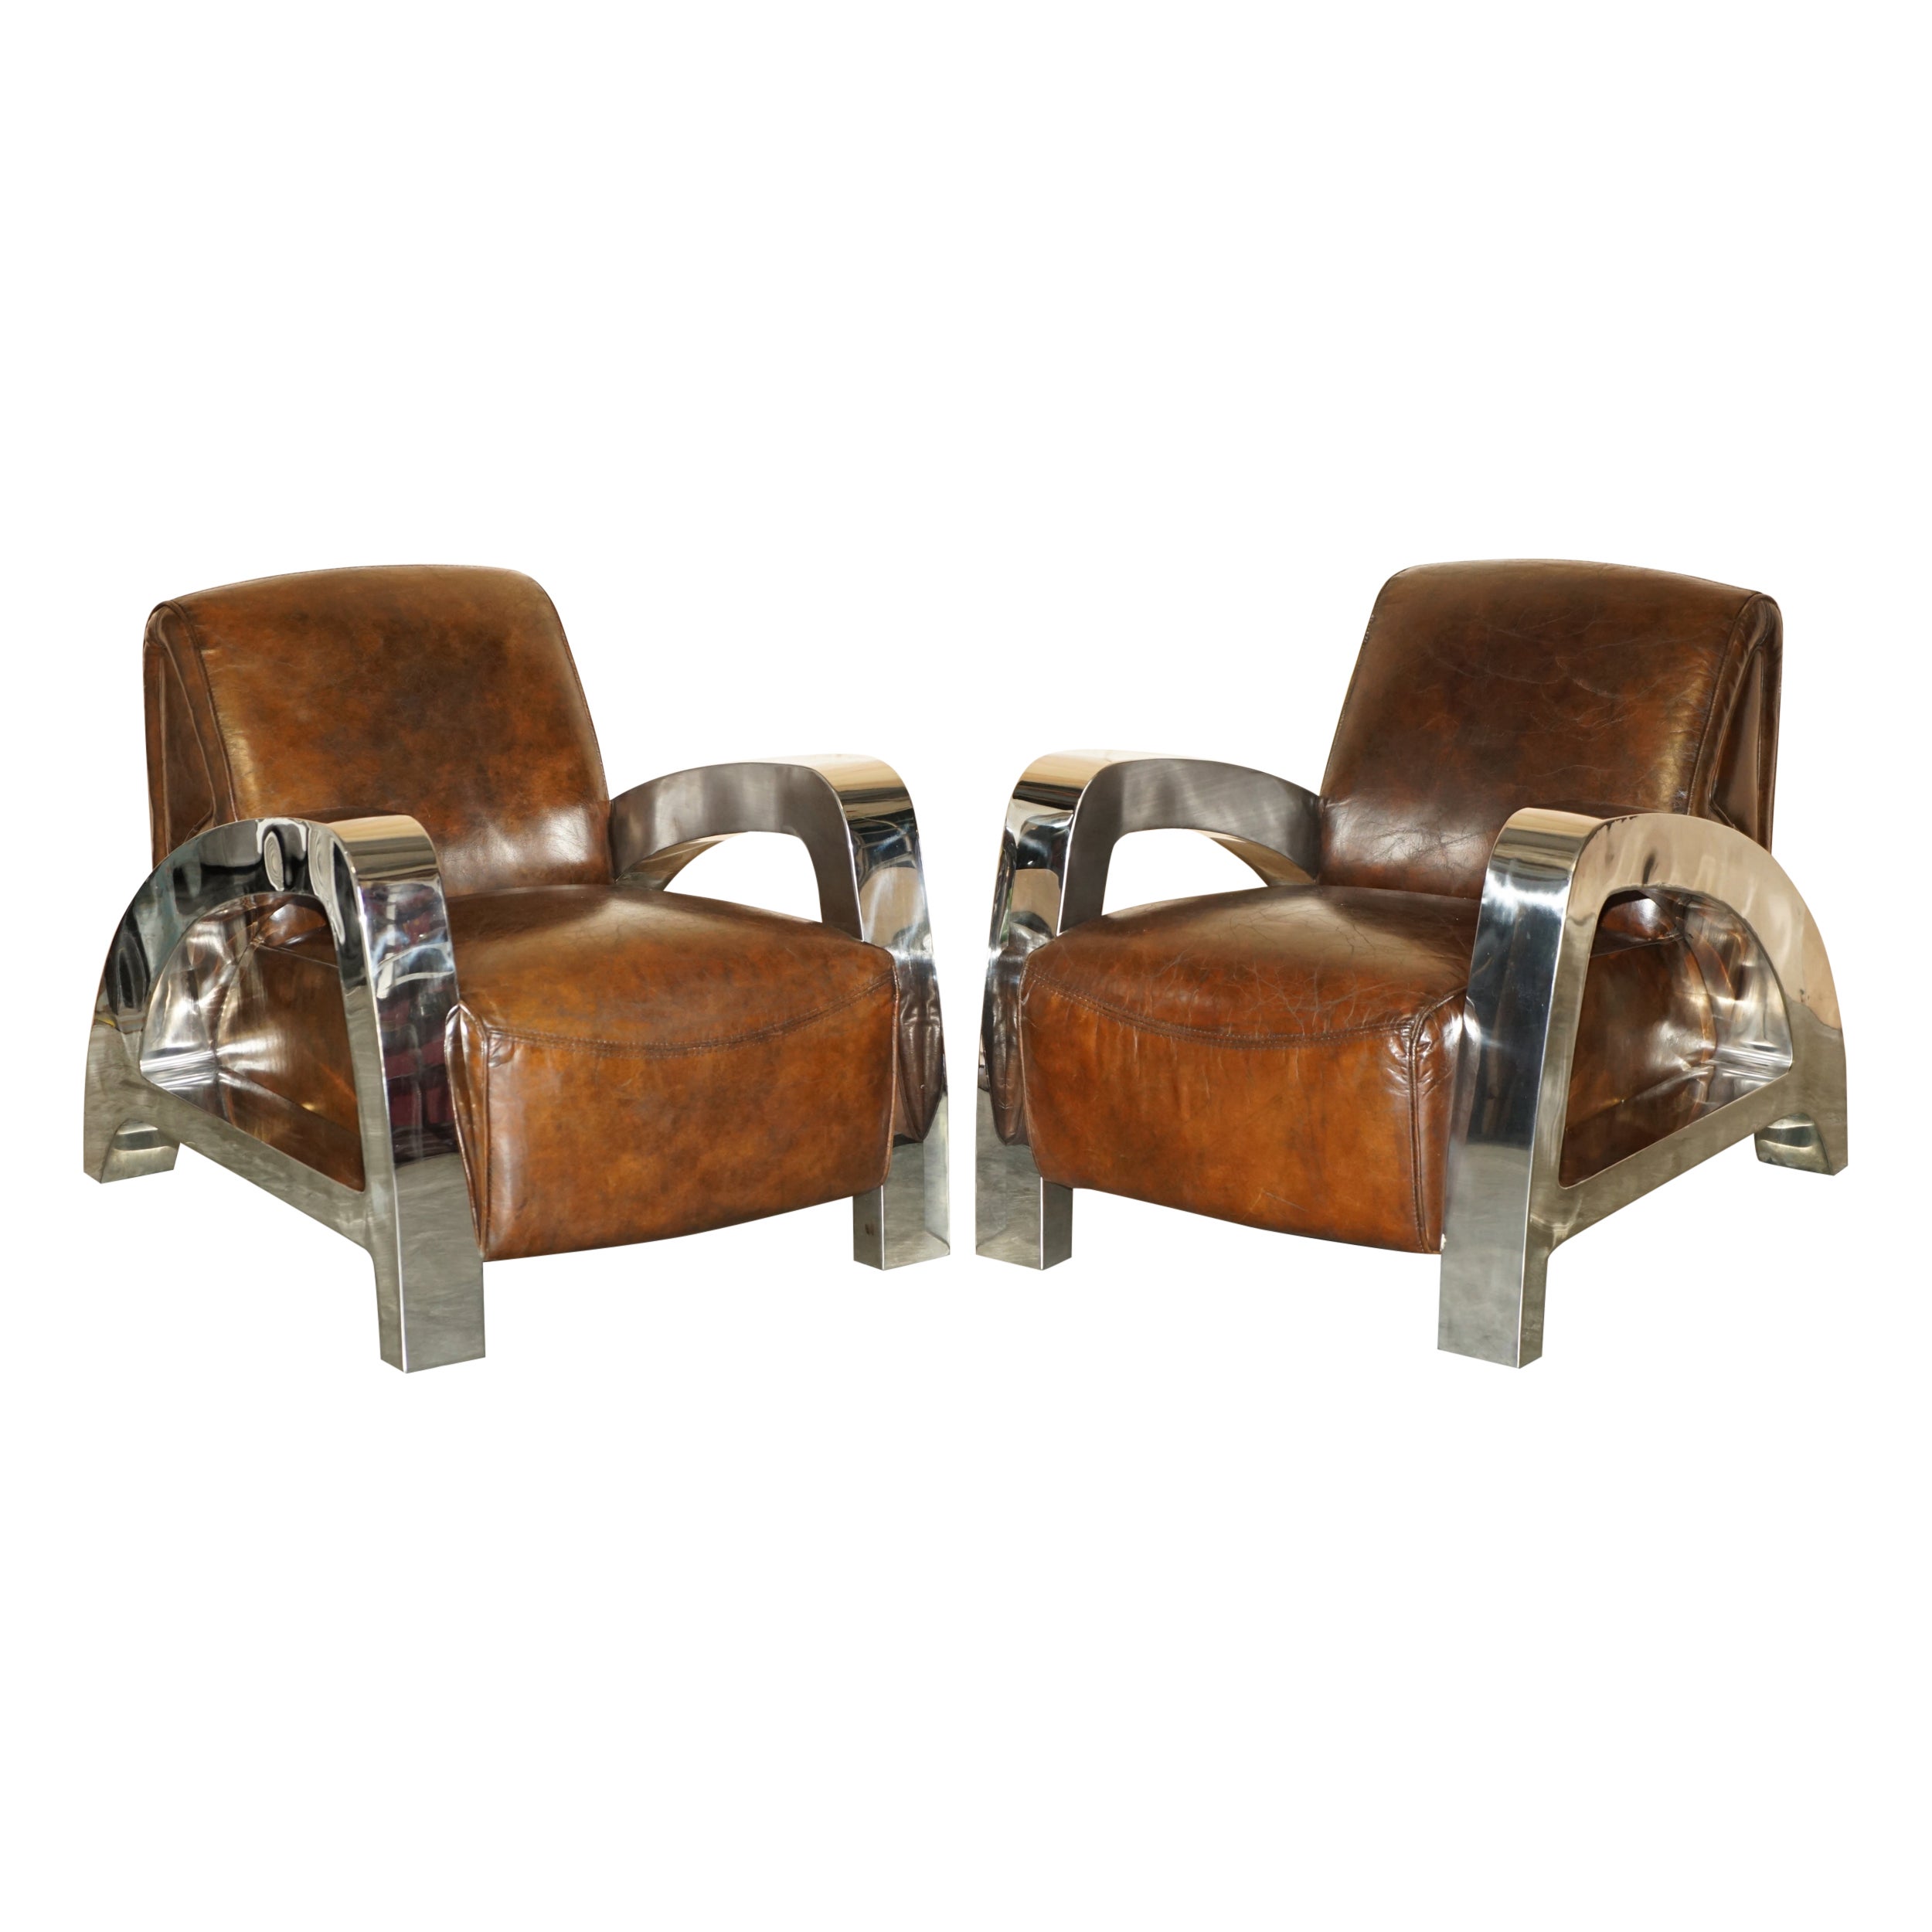 PAIR OF ViNTAGE ART DECO AVIATOR HERITAGE BROWN LEATHER & CHROME ARMCHAIRS